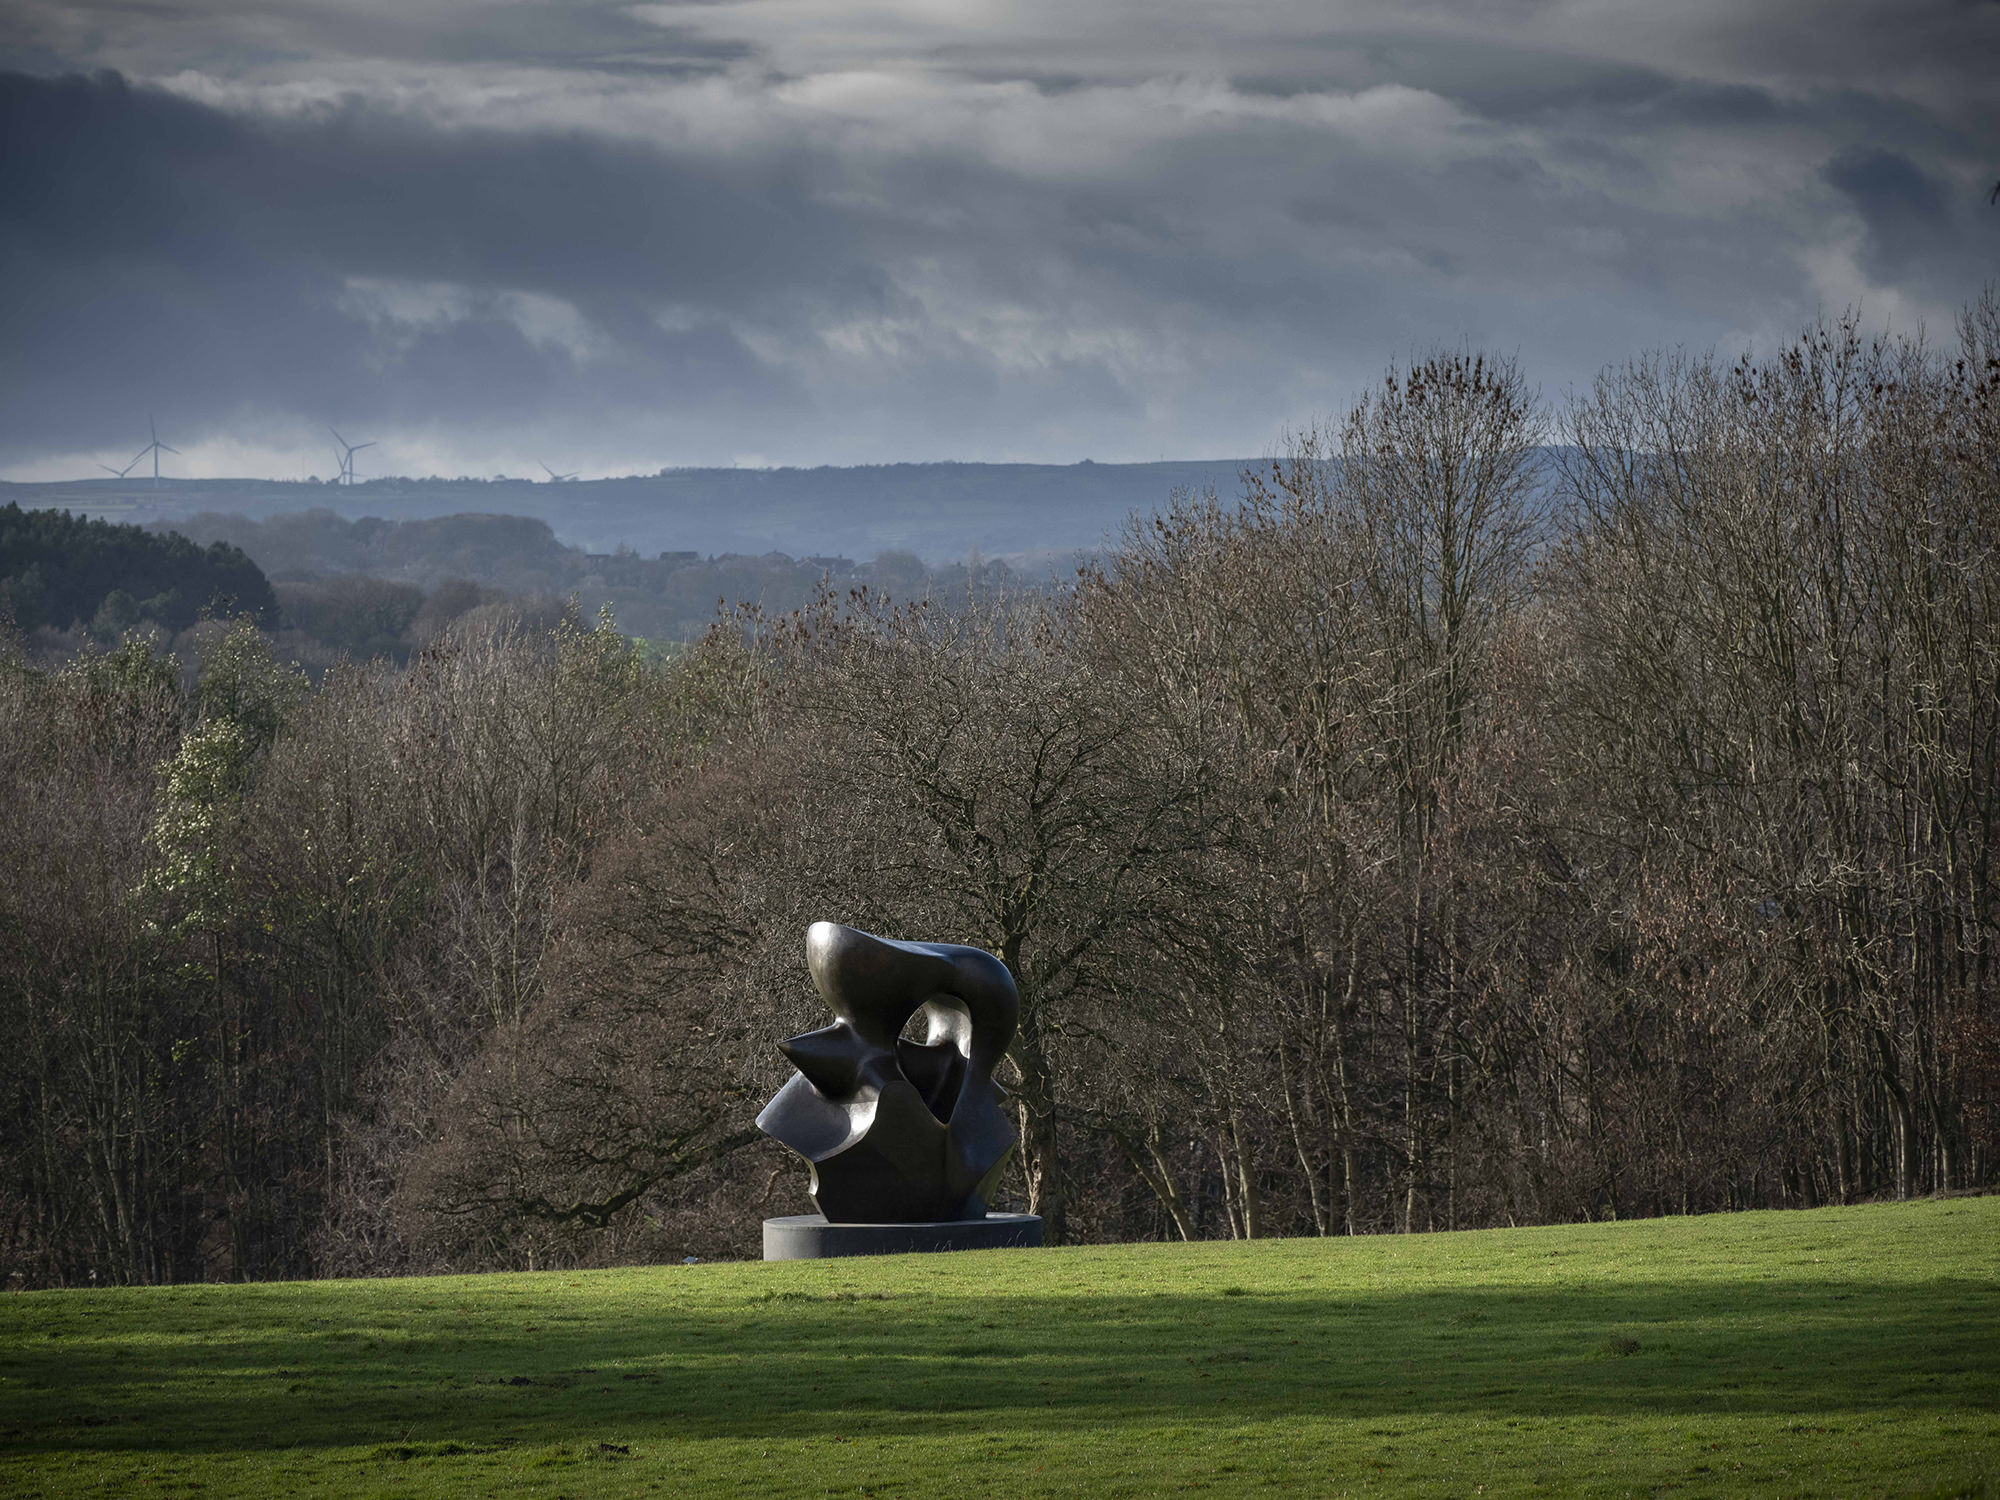 Henry Moore – Large Spindle Piece at Yorkshire Sculpture Park